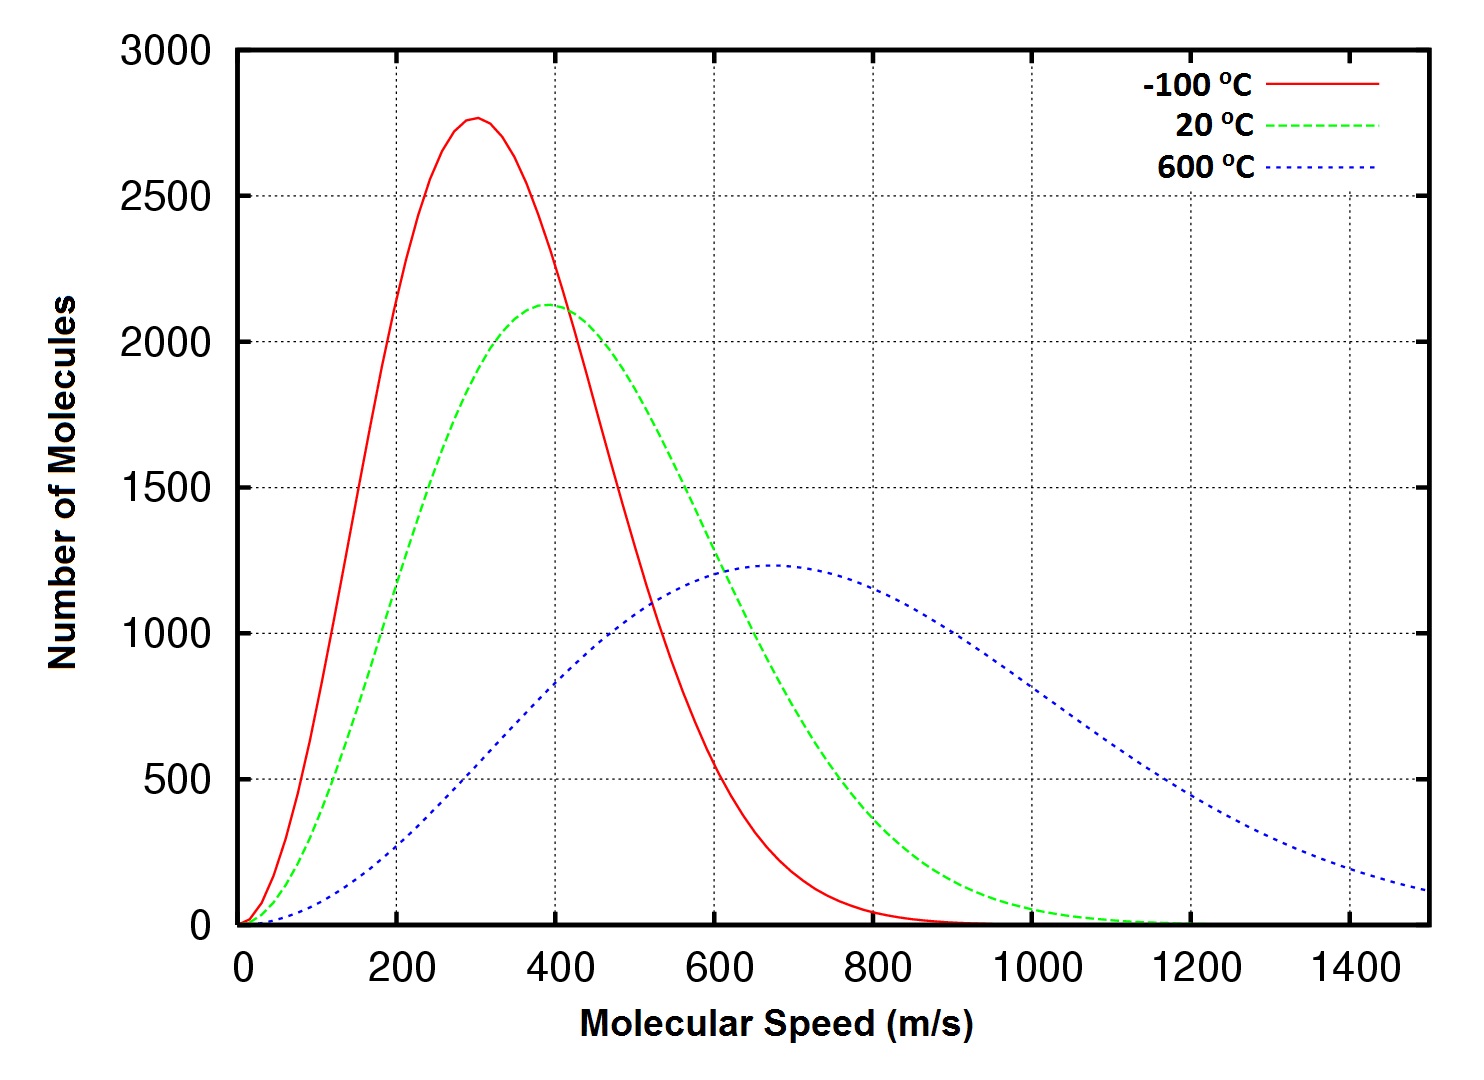 Figure 6.# Distribution of molecular speeds, Oxygen gas at -100, 20 and 600 oC.